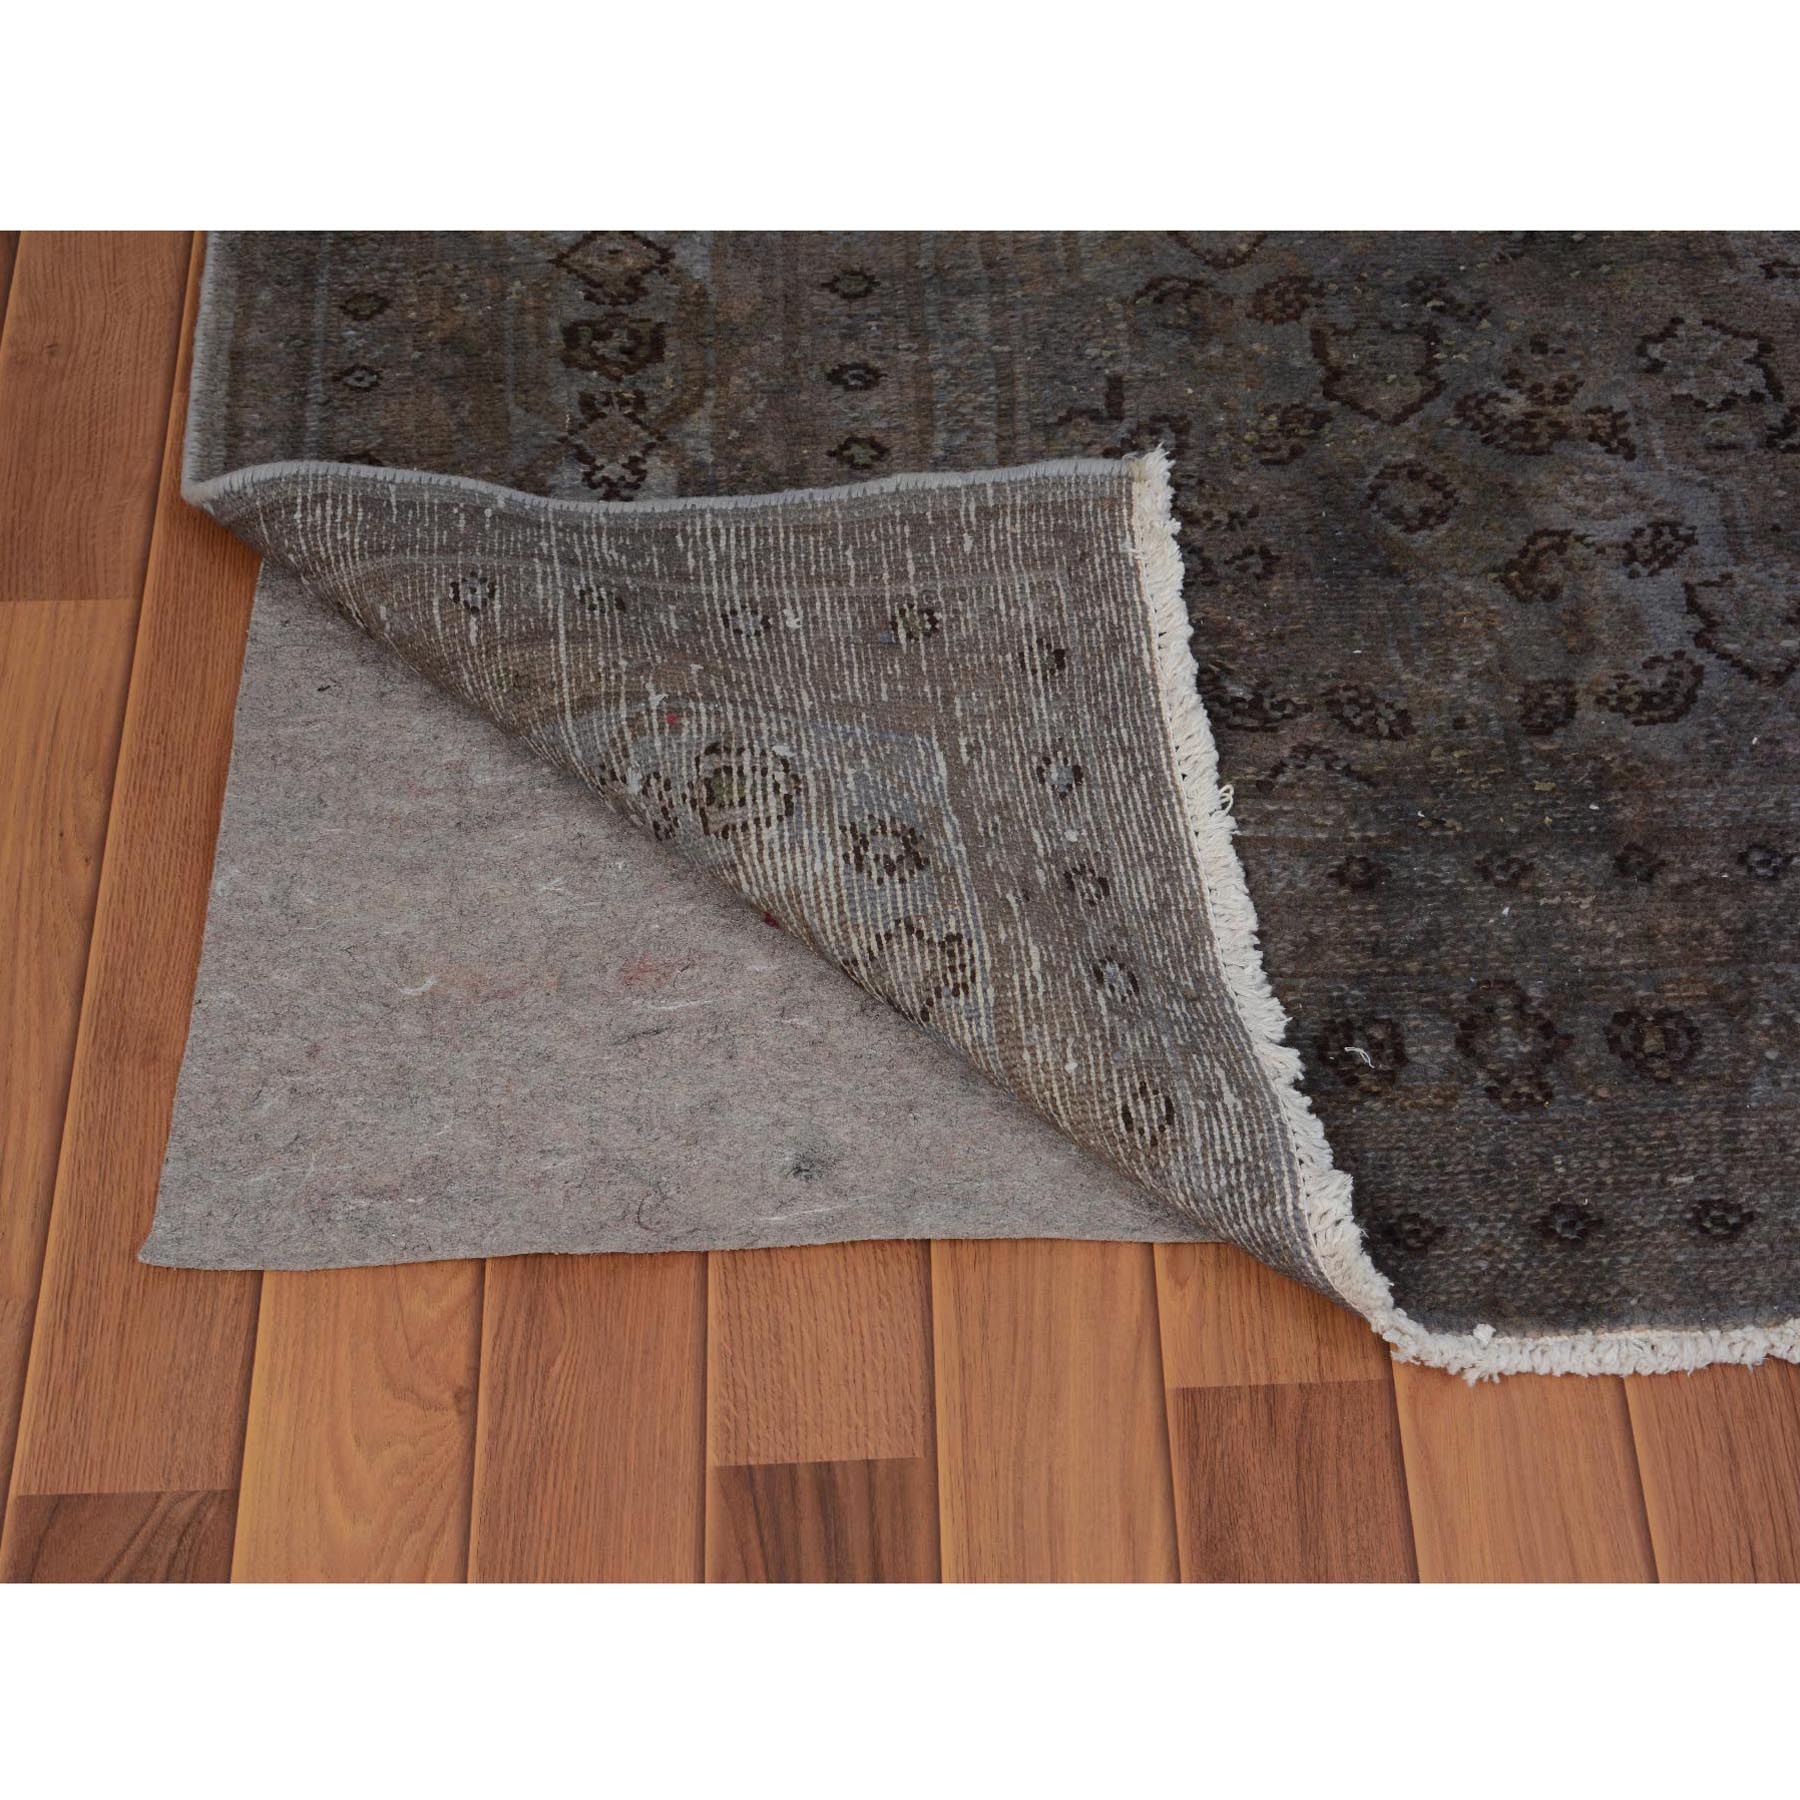 6-5 x9-6  Gray Overdyed Vintage and Worn Down Persian Bibikabad Hand Knotted Oriental Rug 